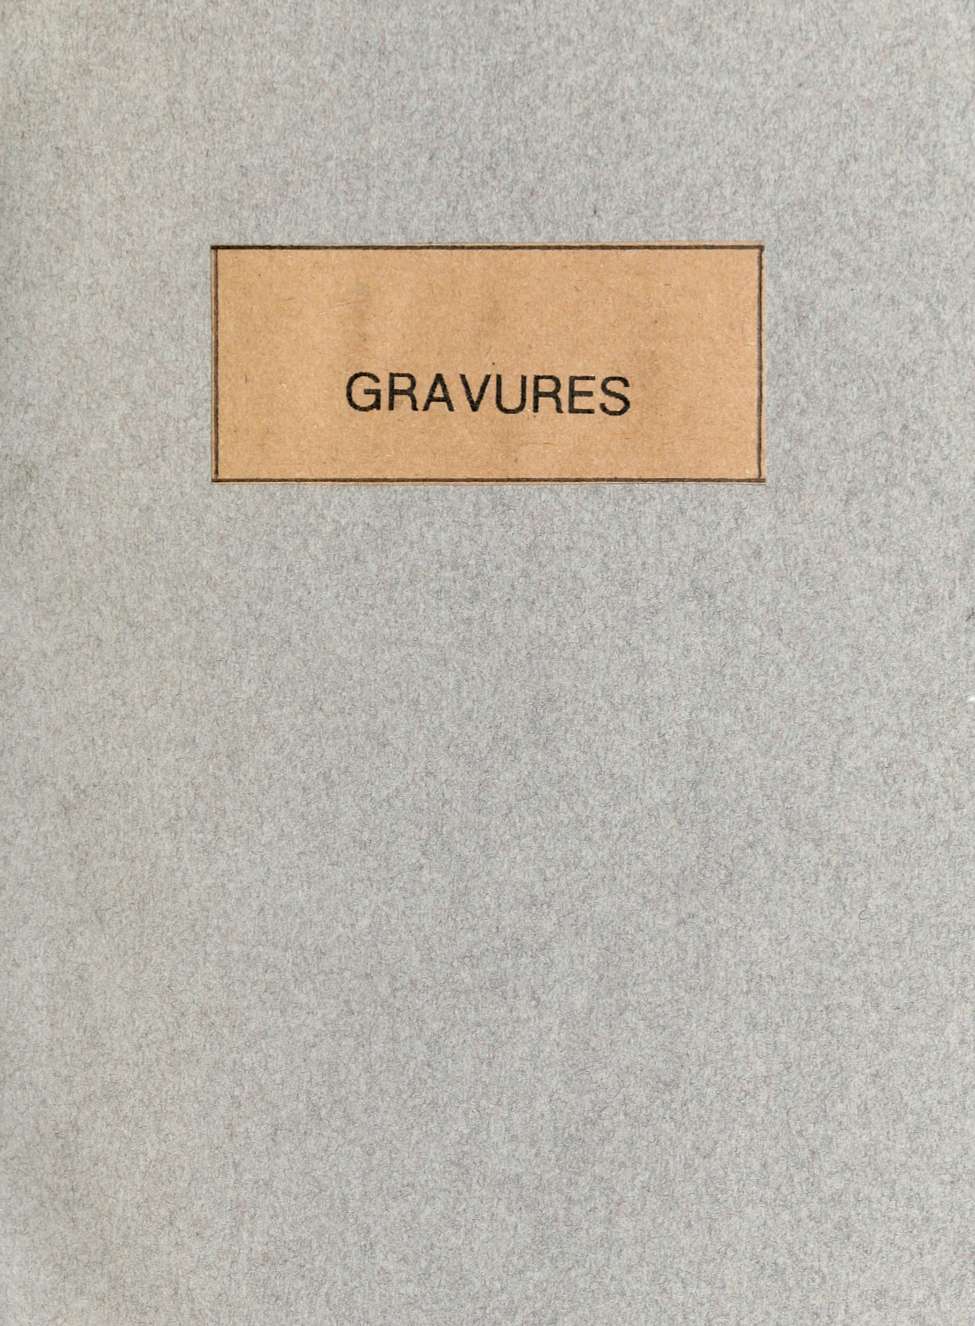 Book Cover For Gravures